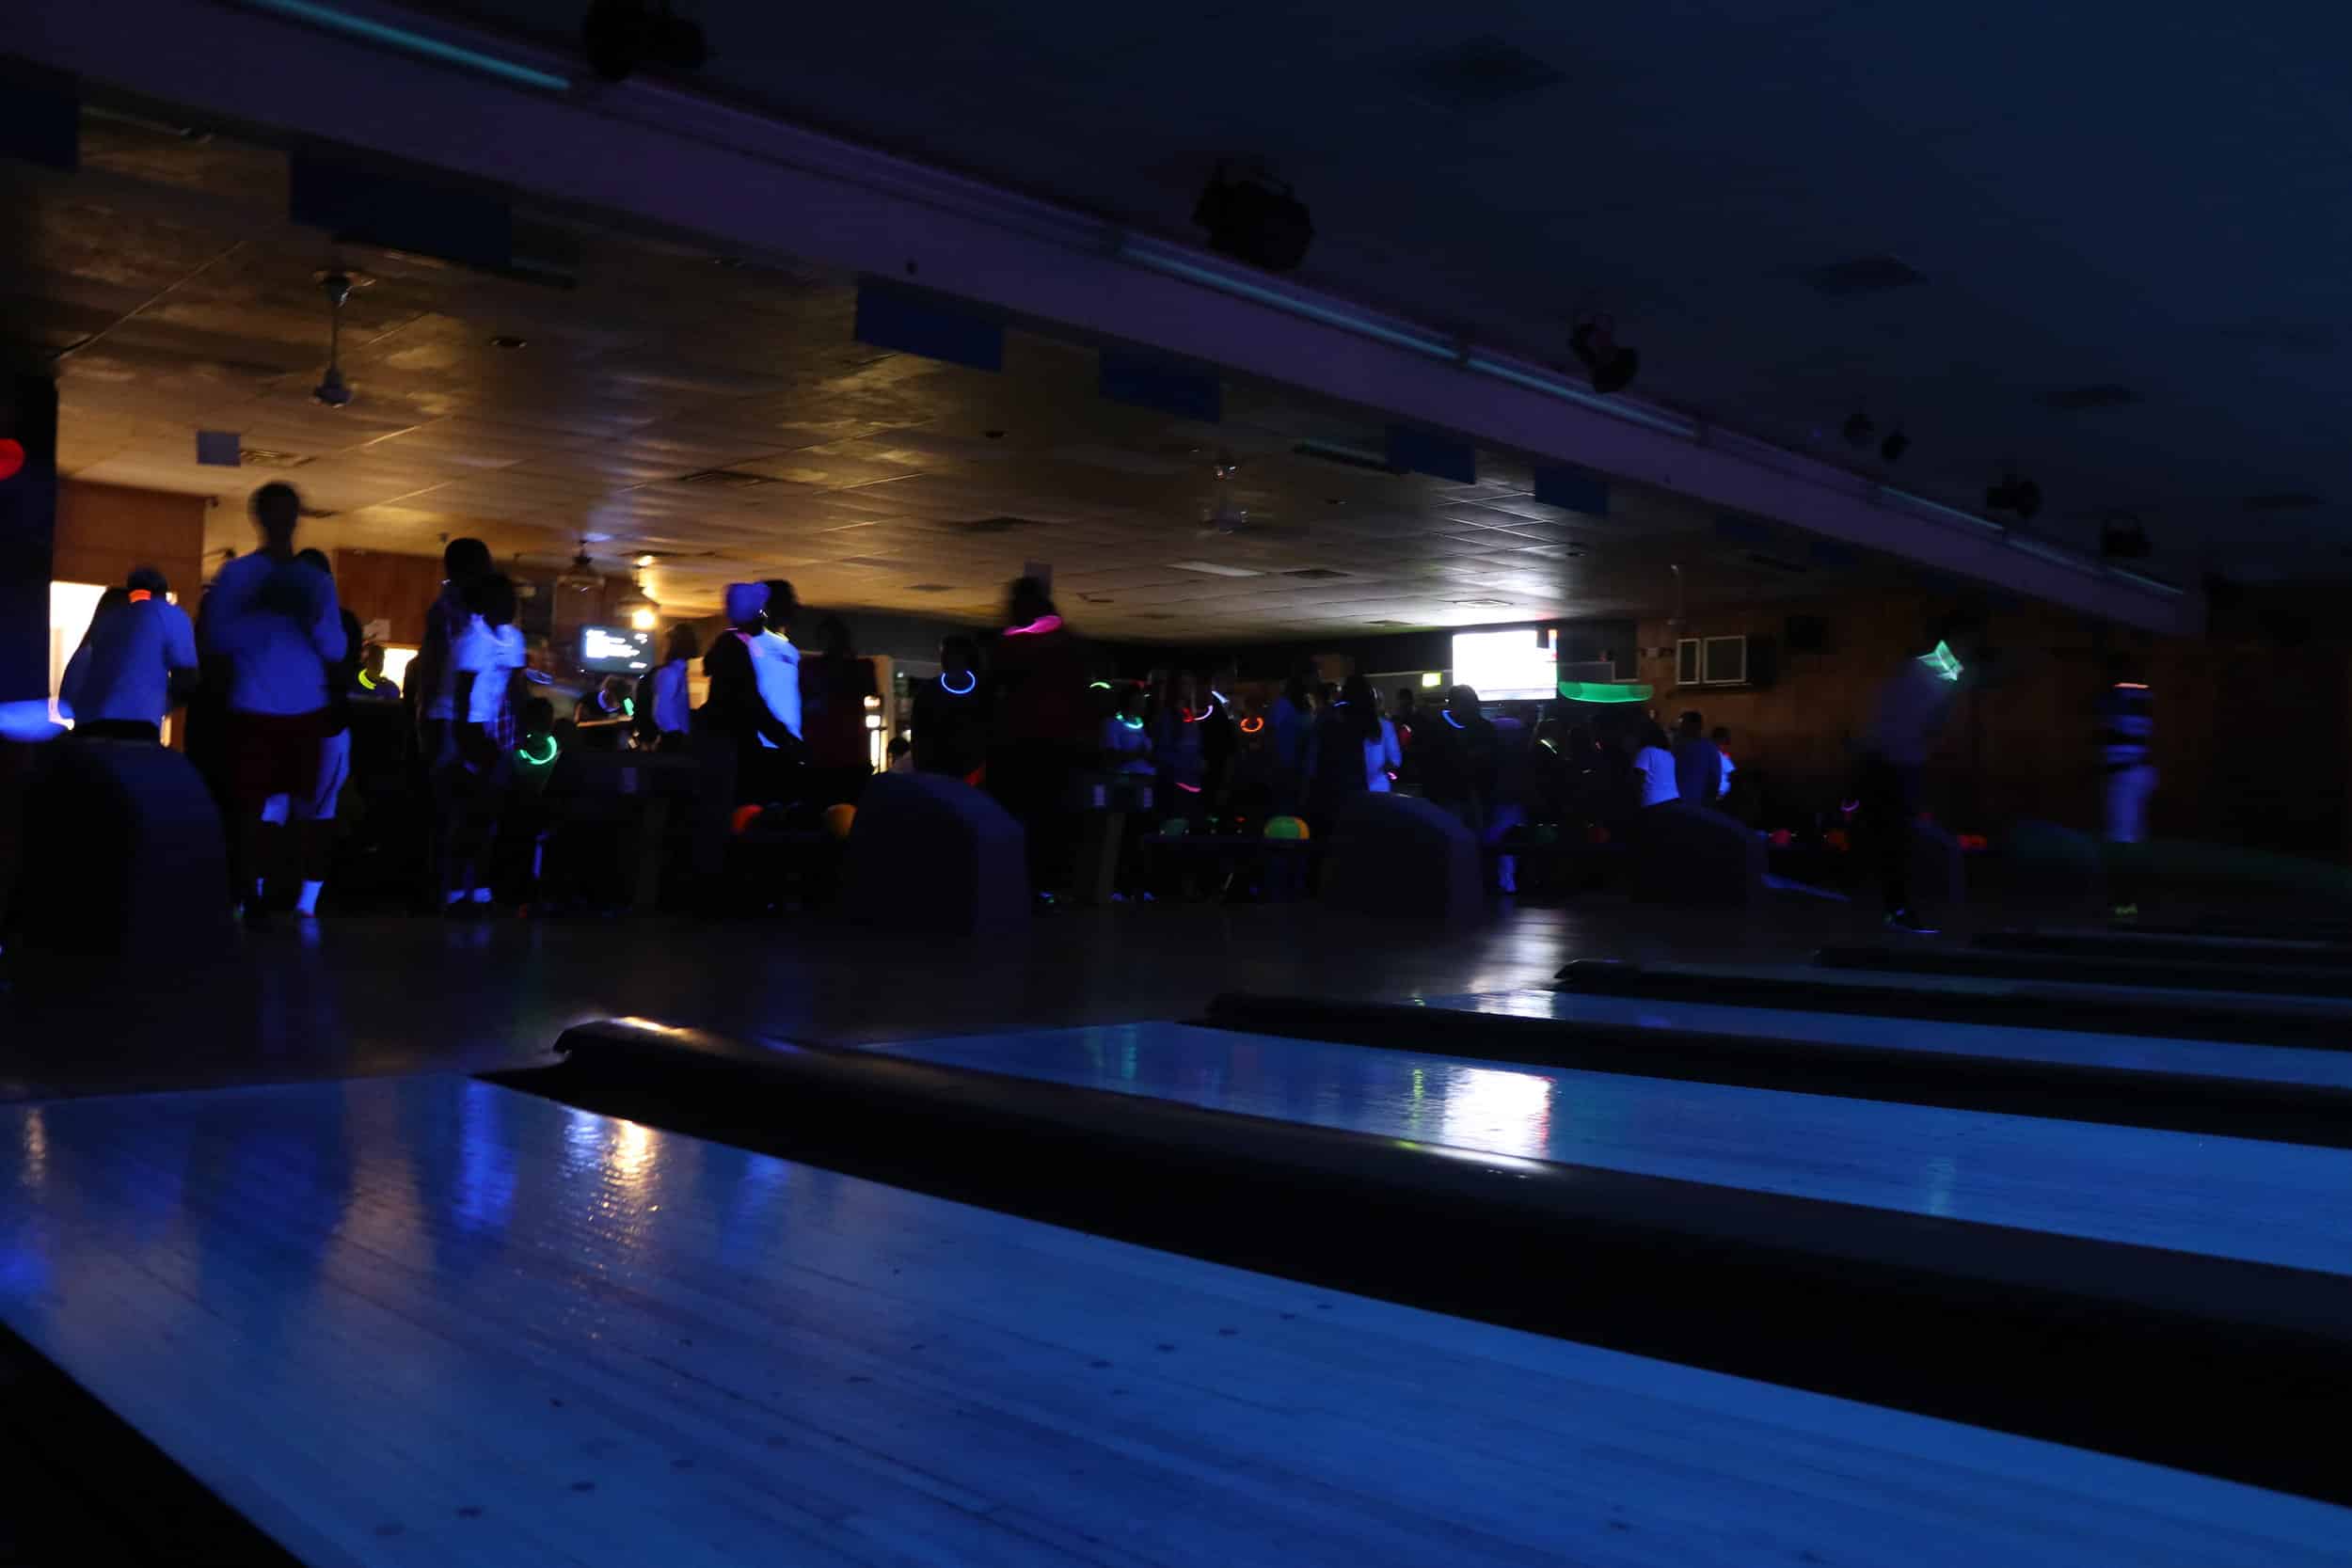 The bowling alley was crowded with NGU students and glow sticks.